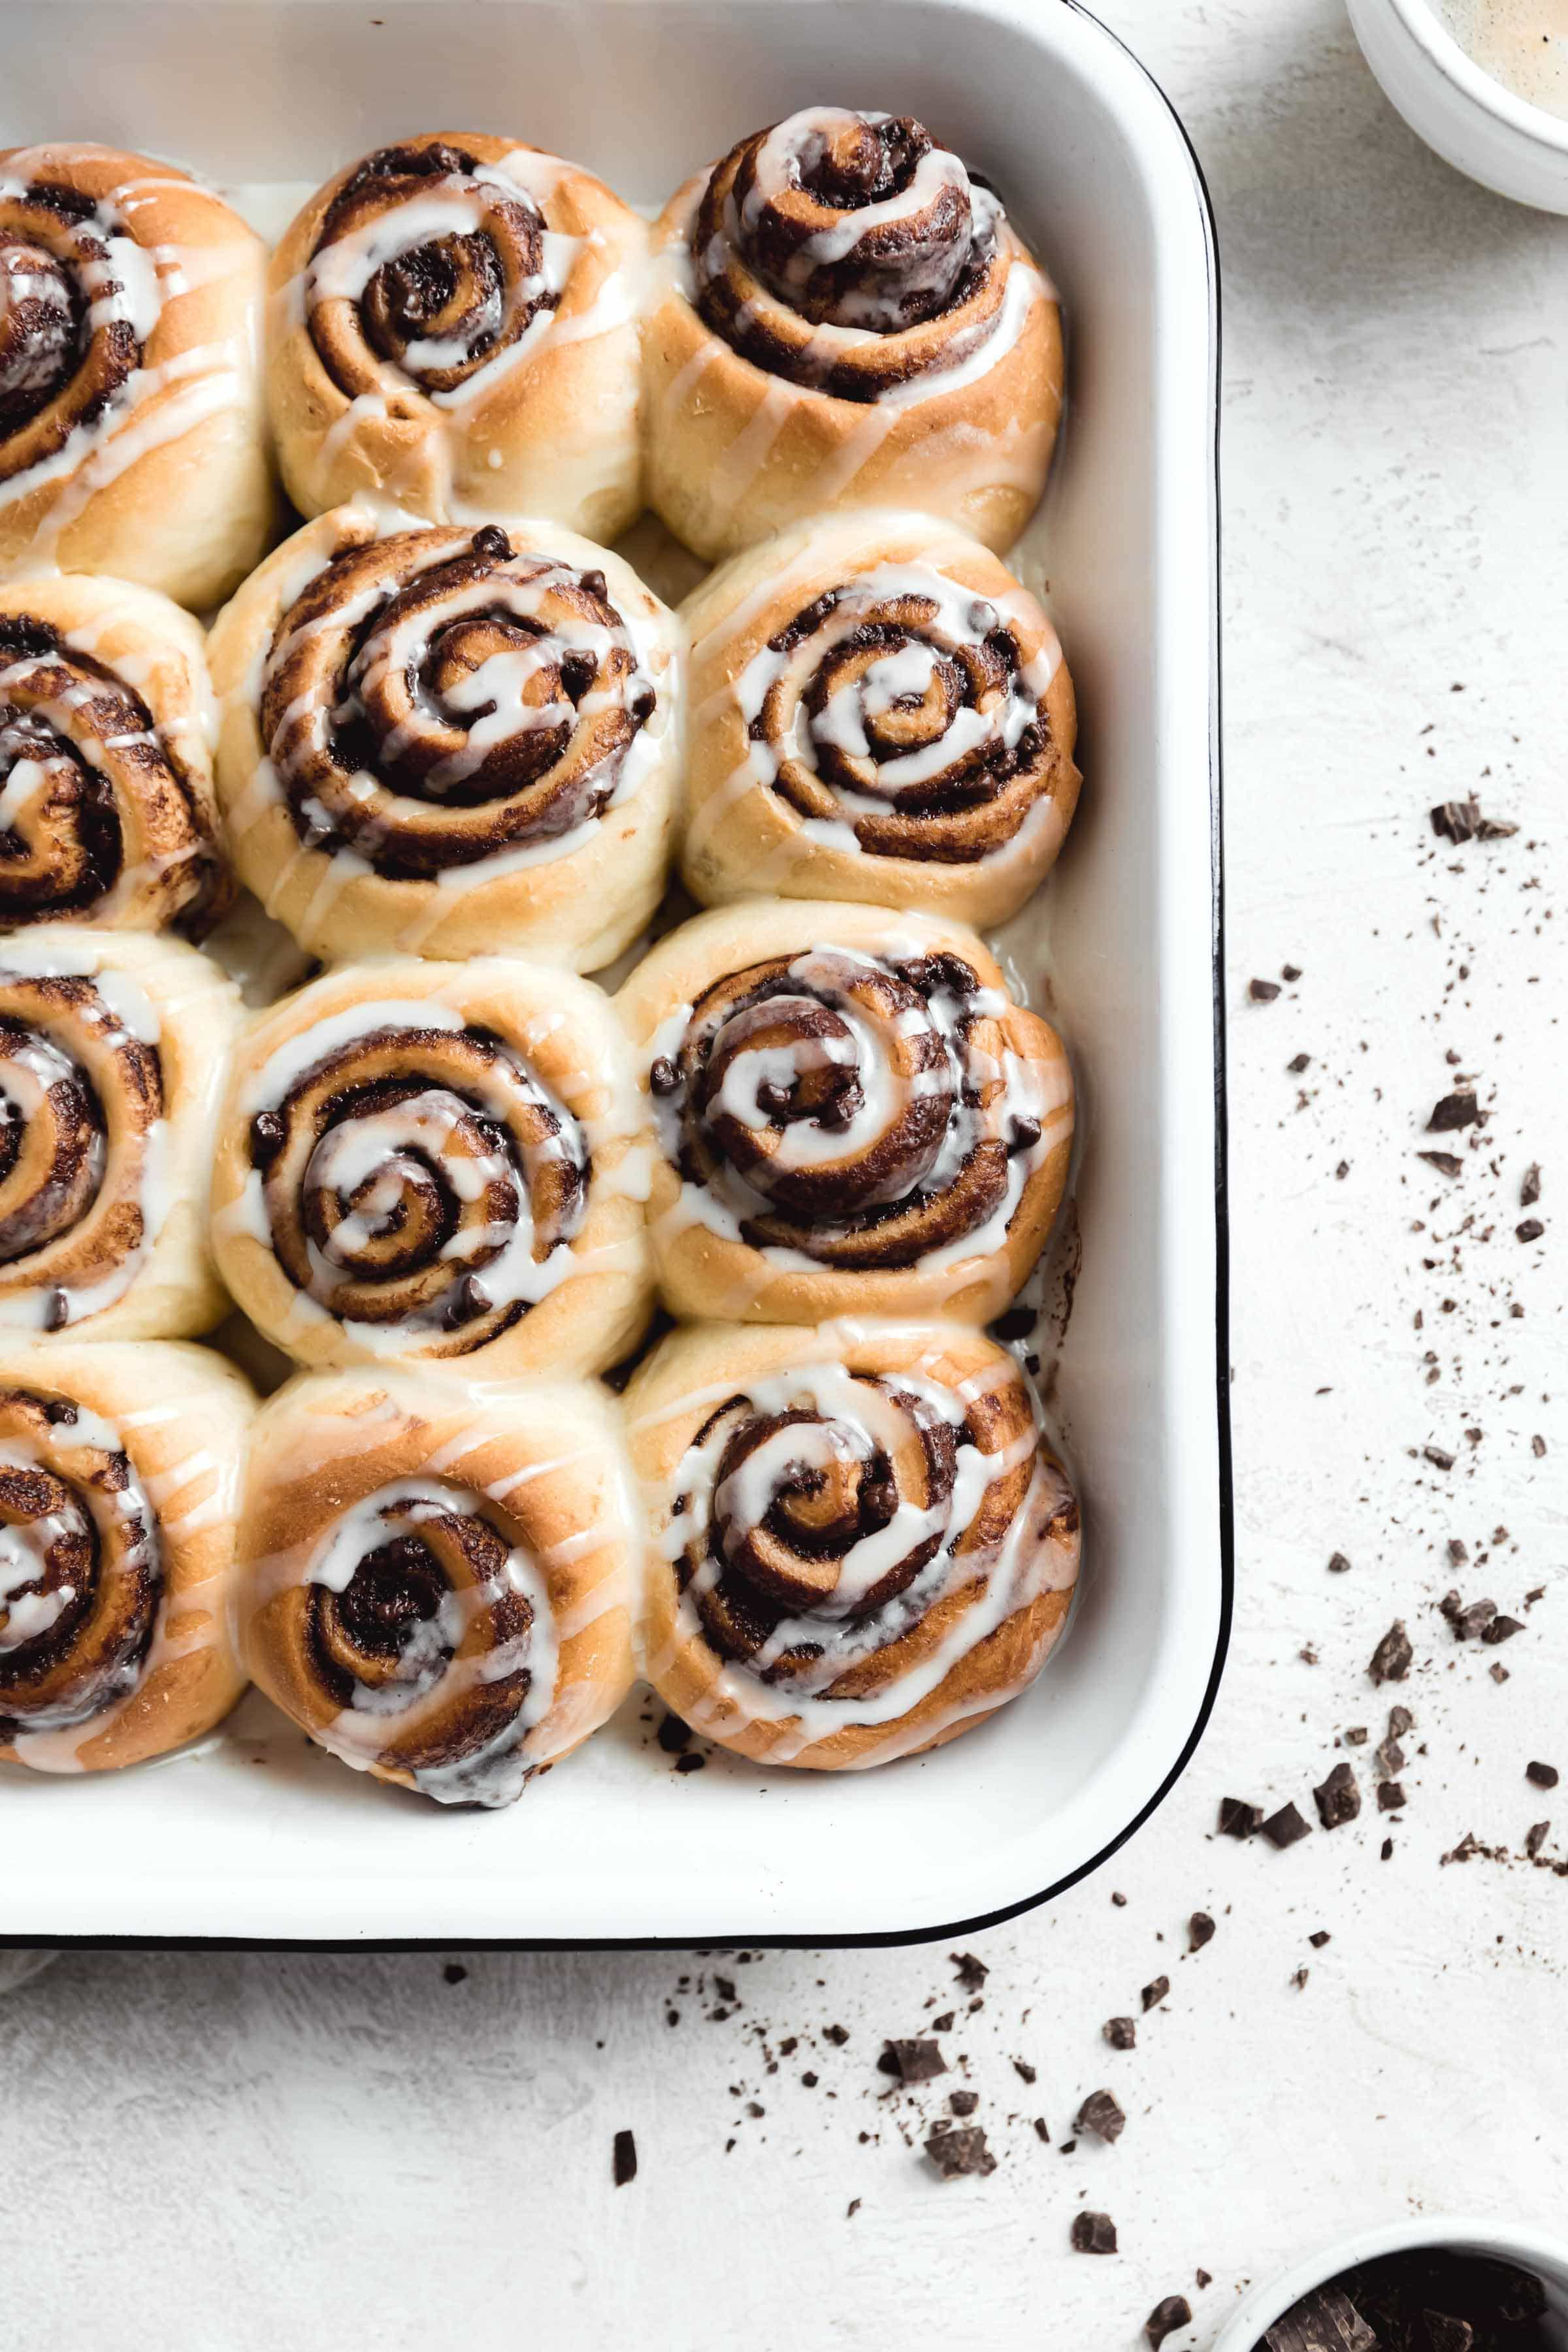 Nothing says holiday baking more than cinnamon rolls...except maybe CHOCOLATE cinnamon rolls. These pillow soft cinnamon rolls are filled with chocolate, drizzled wit the most perfect cream cheese icing and absolutely scrumptious. Best part? They’re ready in under an hour. #cinnamonrolls #bromabakery #foodphotography #easy